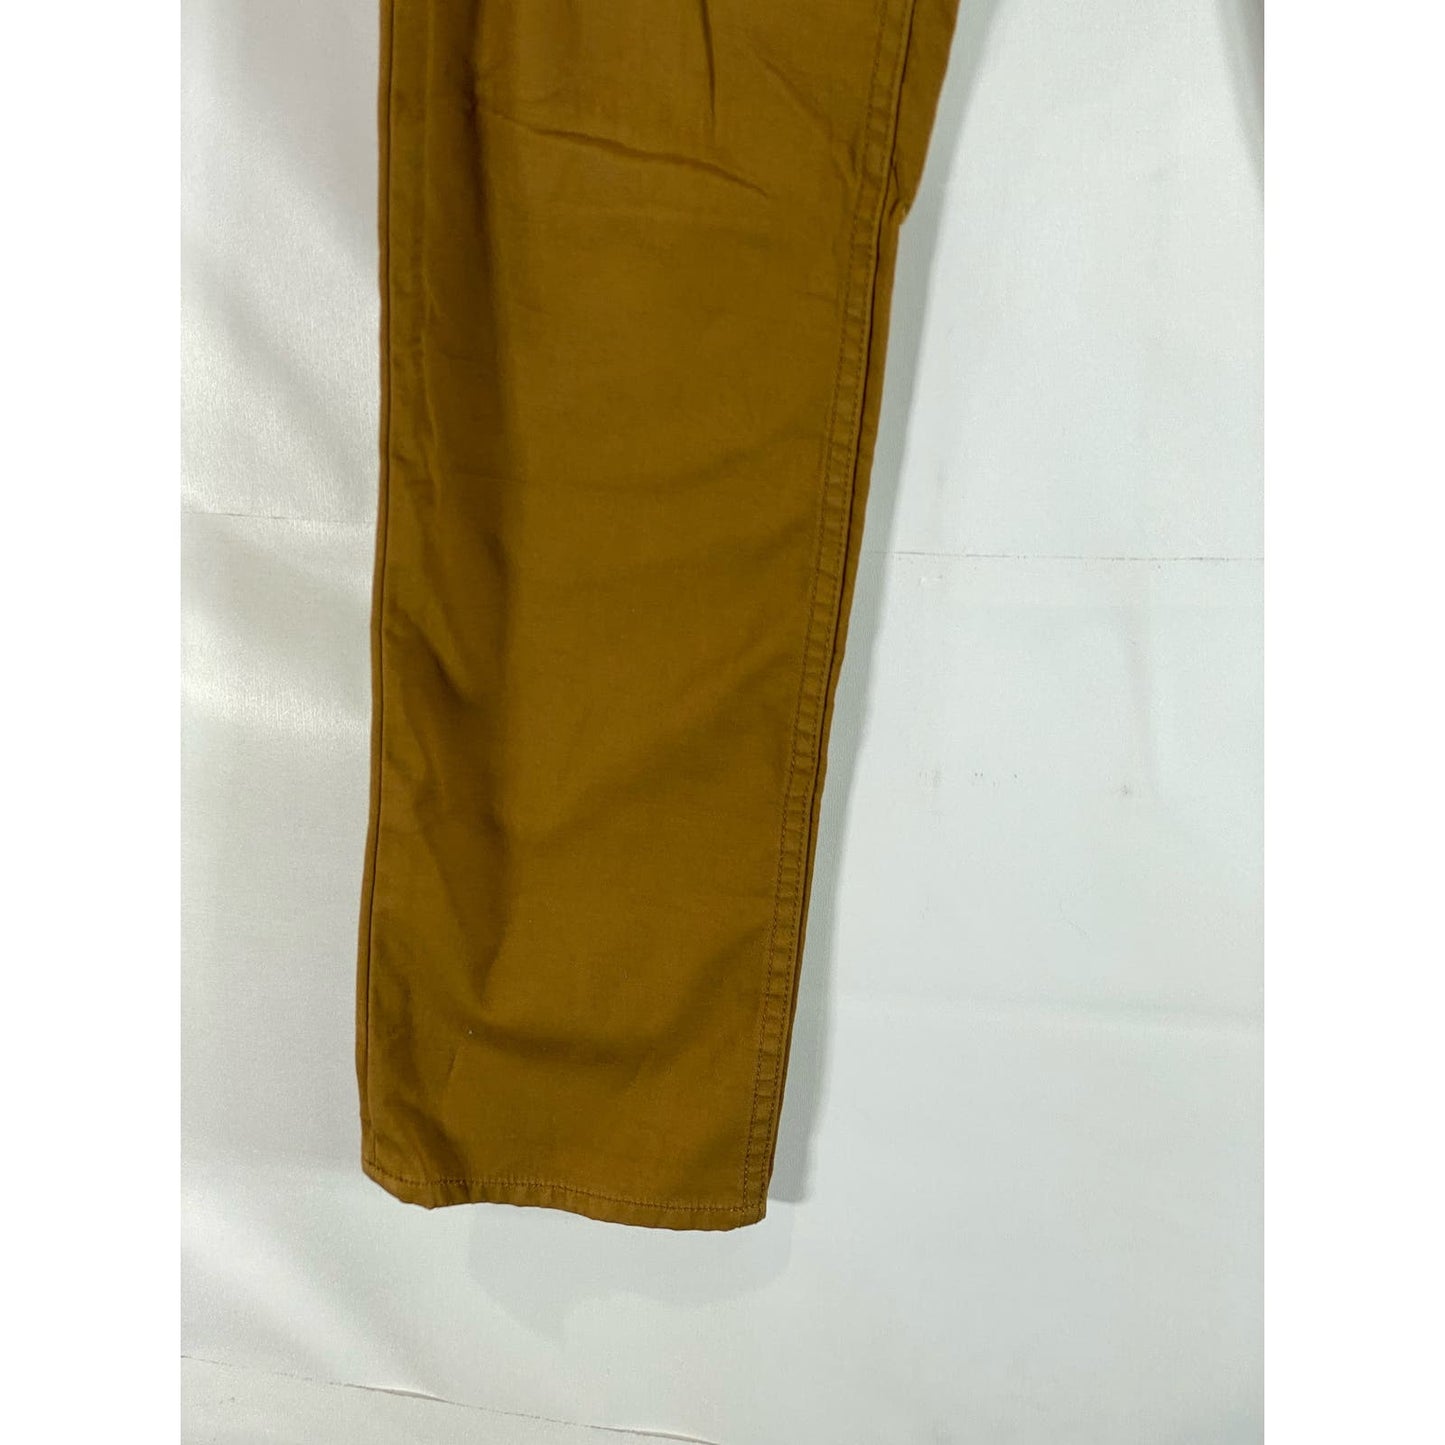 MARC By MARC JACOBS Men's Bronze Brown Shane Fit Slim Classic Chino Pant SZ30x34